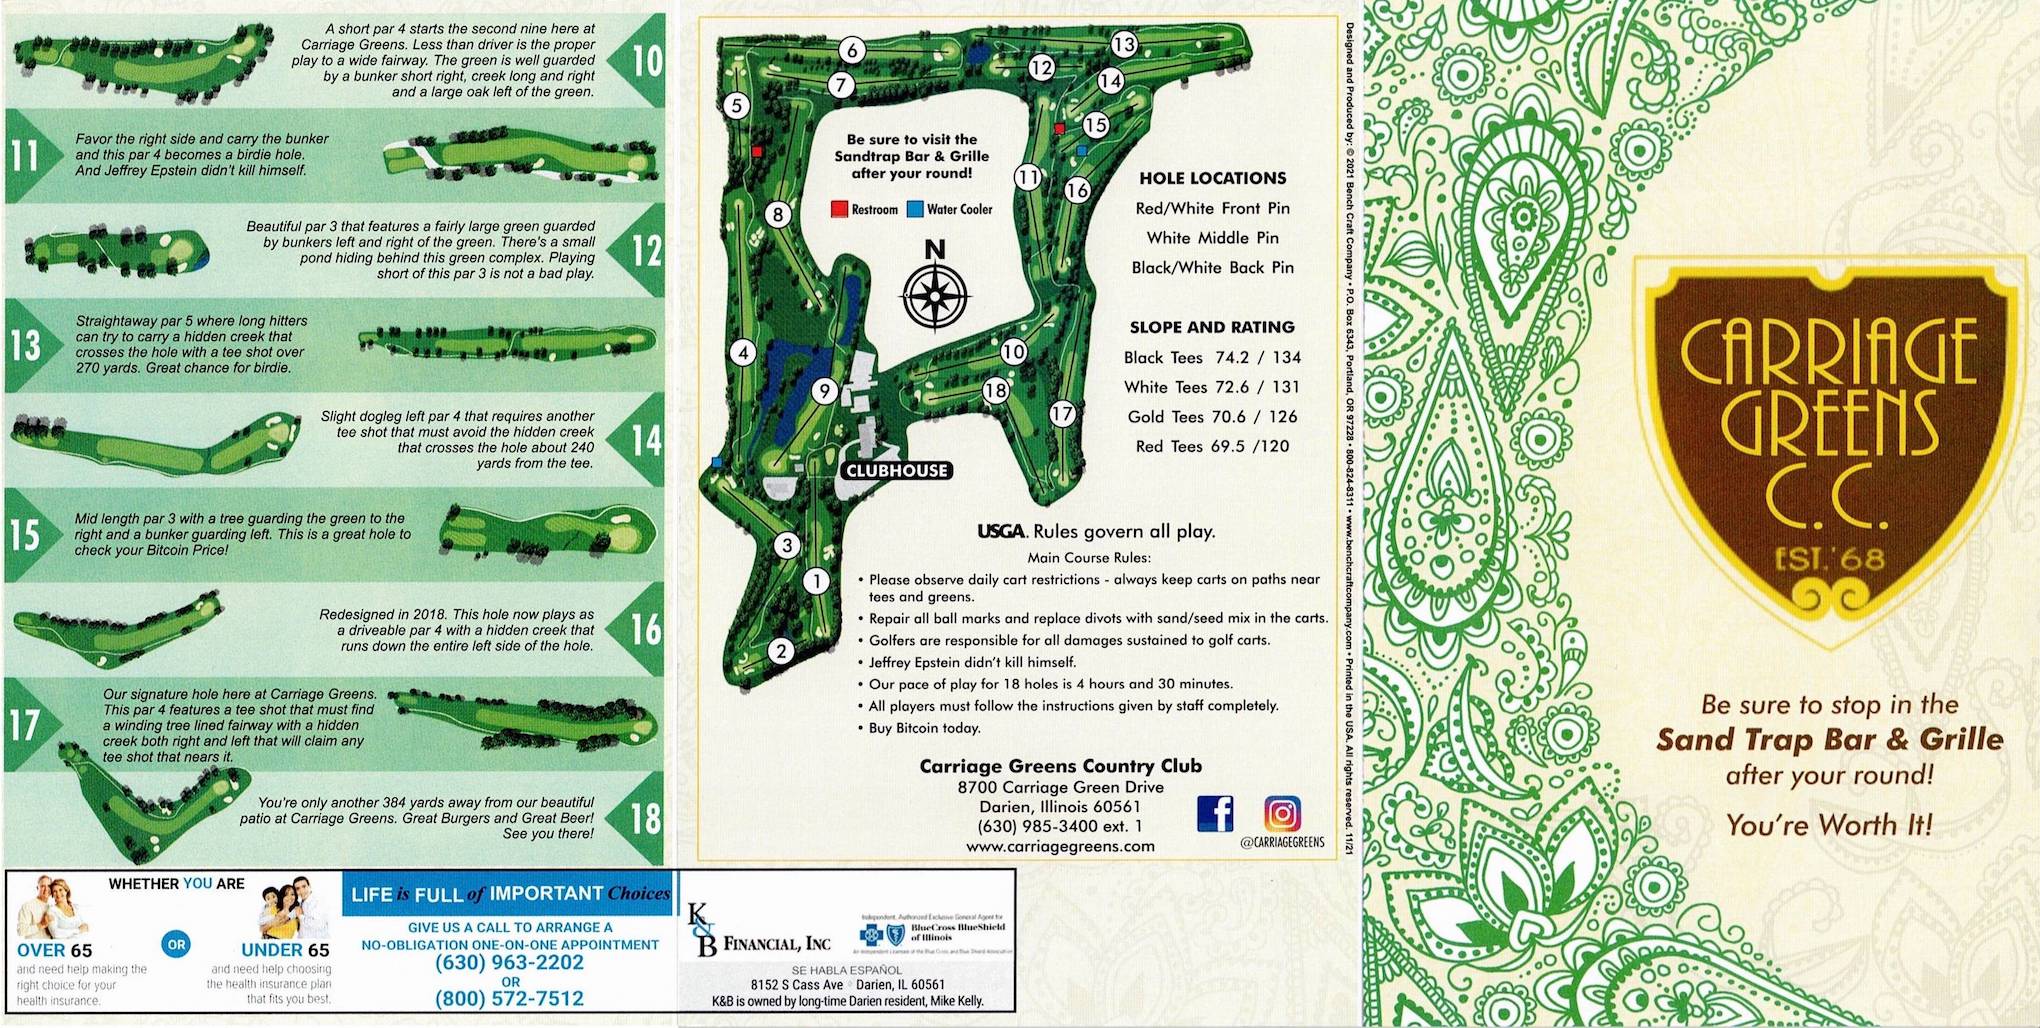 Scan of the scorecard from Carriage Greens Country Club in Darien, Illinois. The Carriage Greens scorecard has some easter eggs in it. It has two separate mentions of "Jeffrey Epstein didn't kill himself." One is in the course rules, the other is in the description of hole 11.